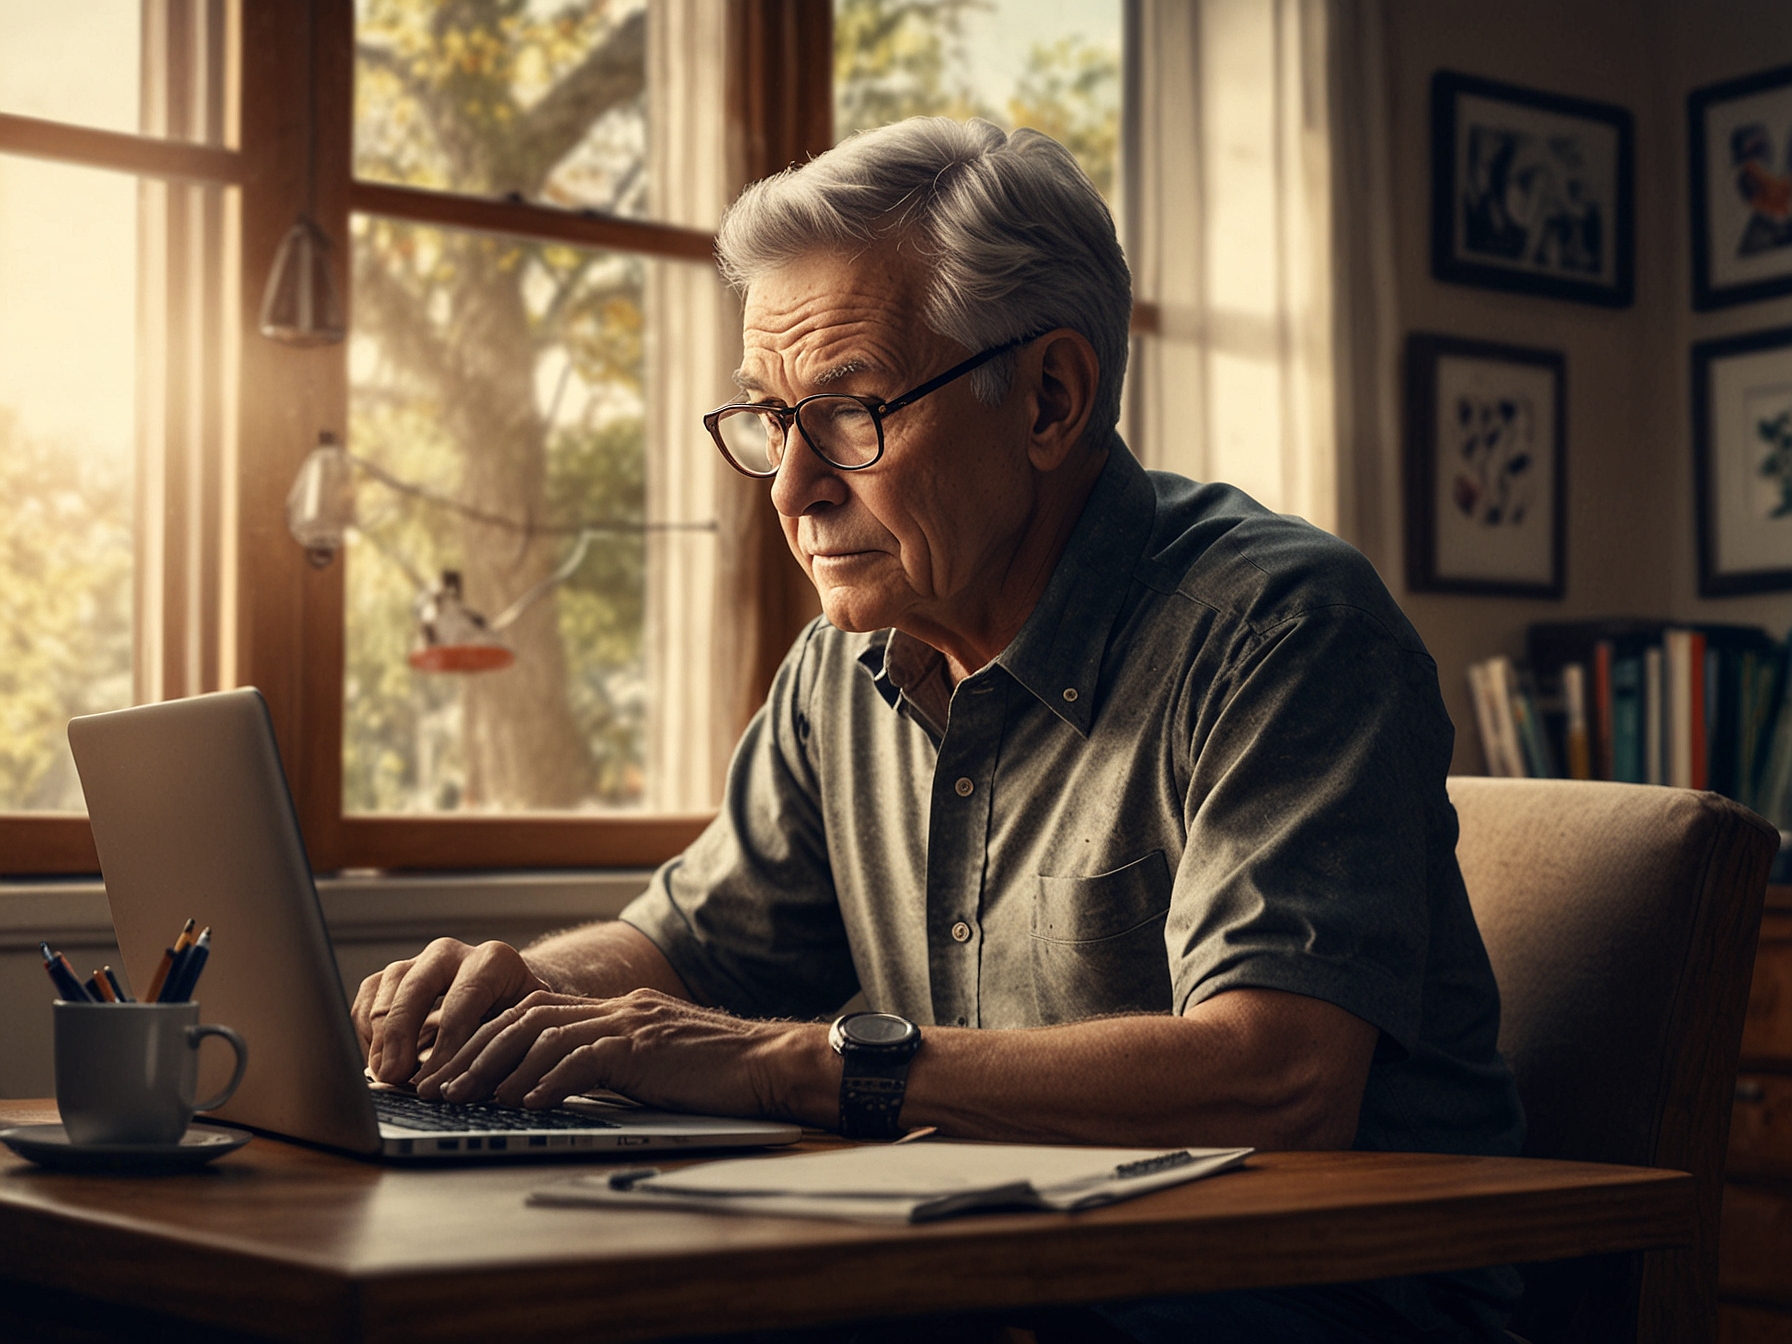 A Baby Boomer entrepreneur working on a laptop in a cozy home office. This image represents the rising trend of older adults starting their own businesses and consulting.